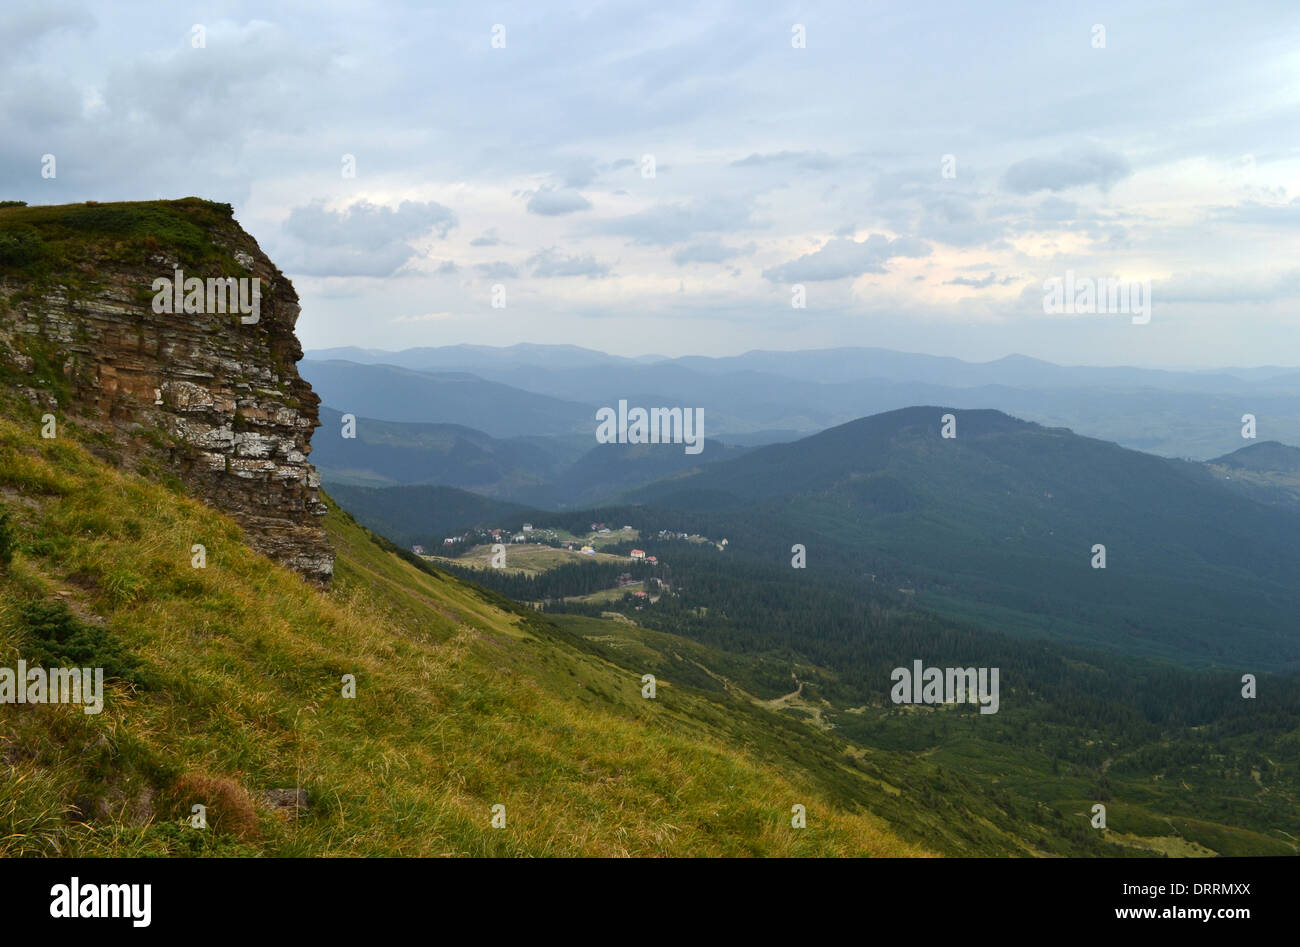 Stone boulder covered with grass in the mountains Stock Photo